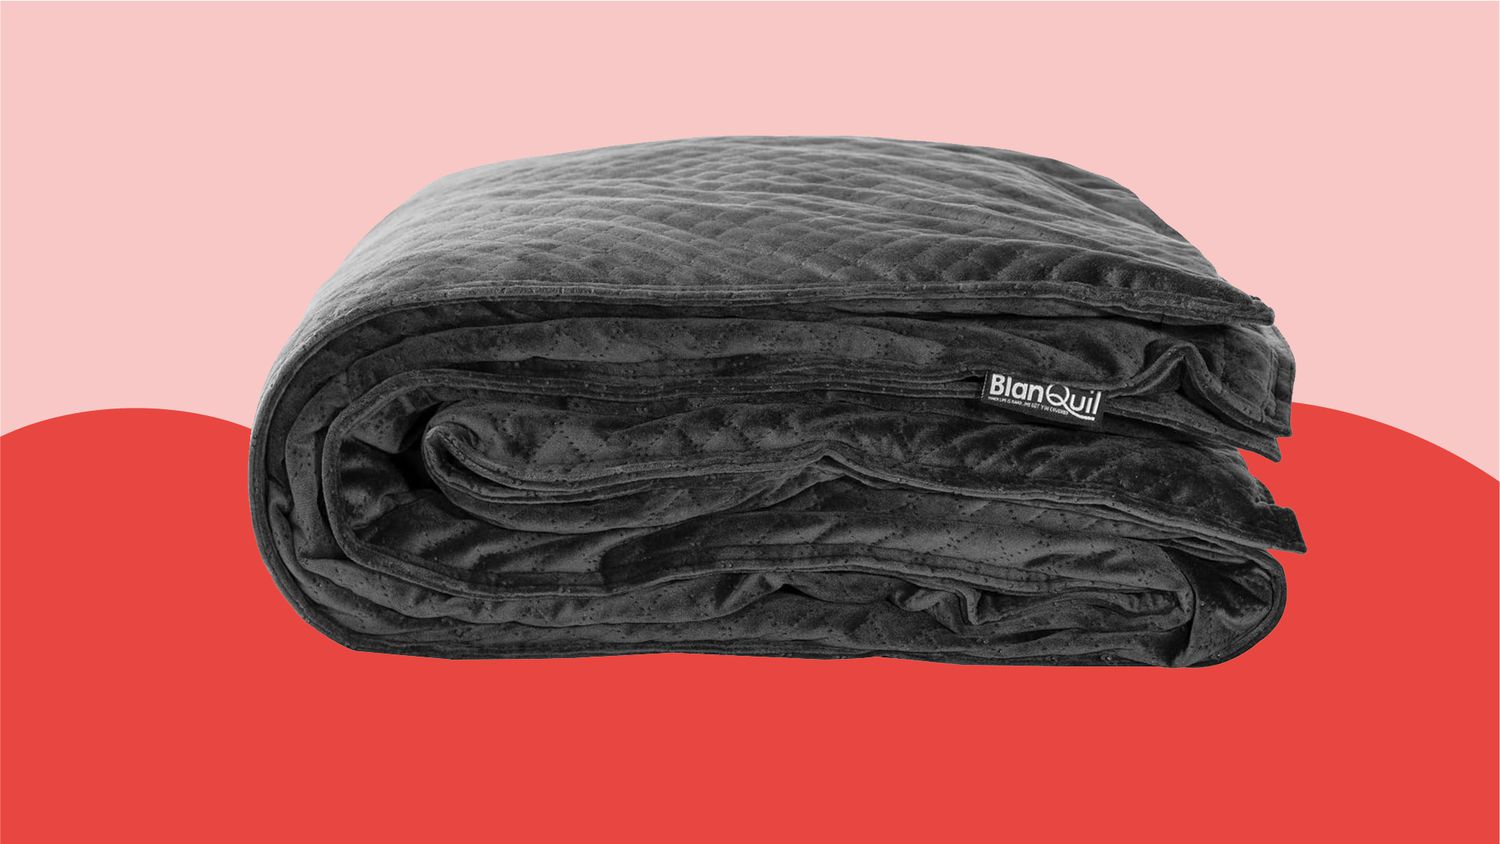 Weighted Blanket Sleep Deep Full Solid Color Soft Warm Washable for People Insomnia Home Bedroom